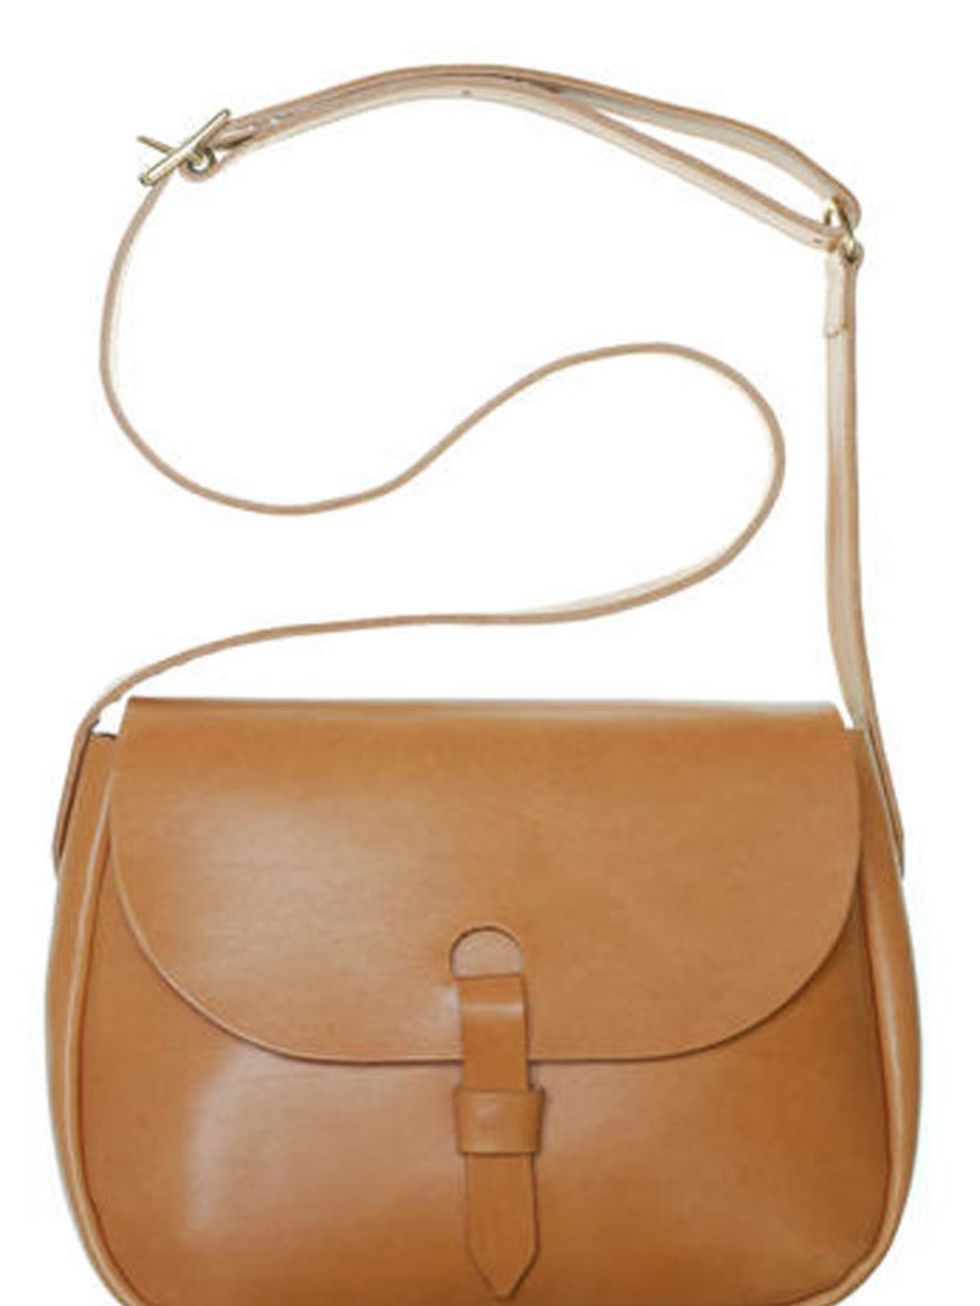 <p><a href="http://www.mimiberry.co.uk/collection/ladies_bags/745_mimi-2011-s-s-classic-little-peggy">Mimi Berry</a> tan satchel, £202</p>